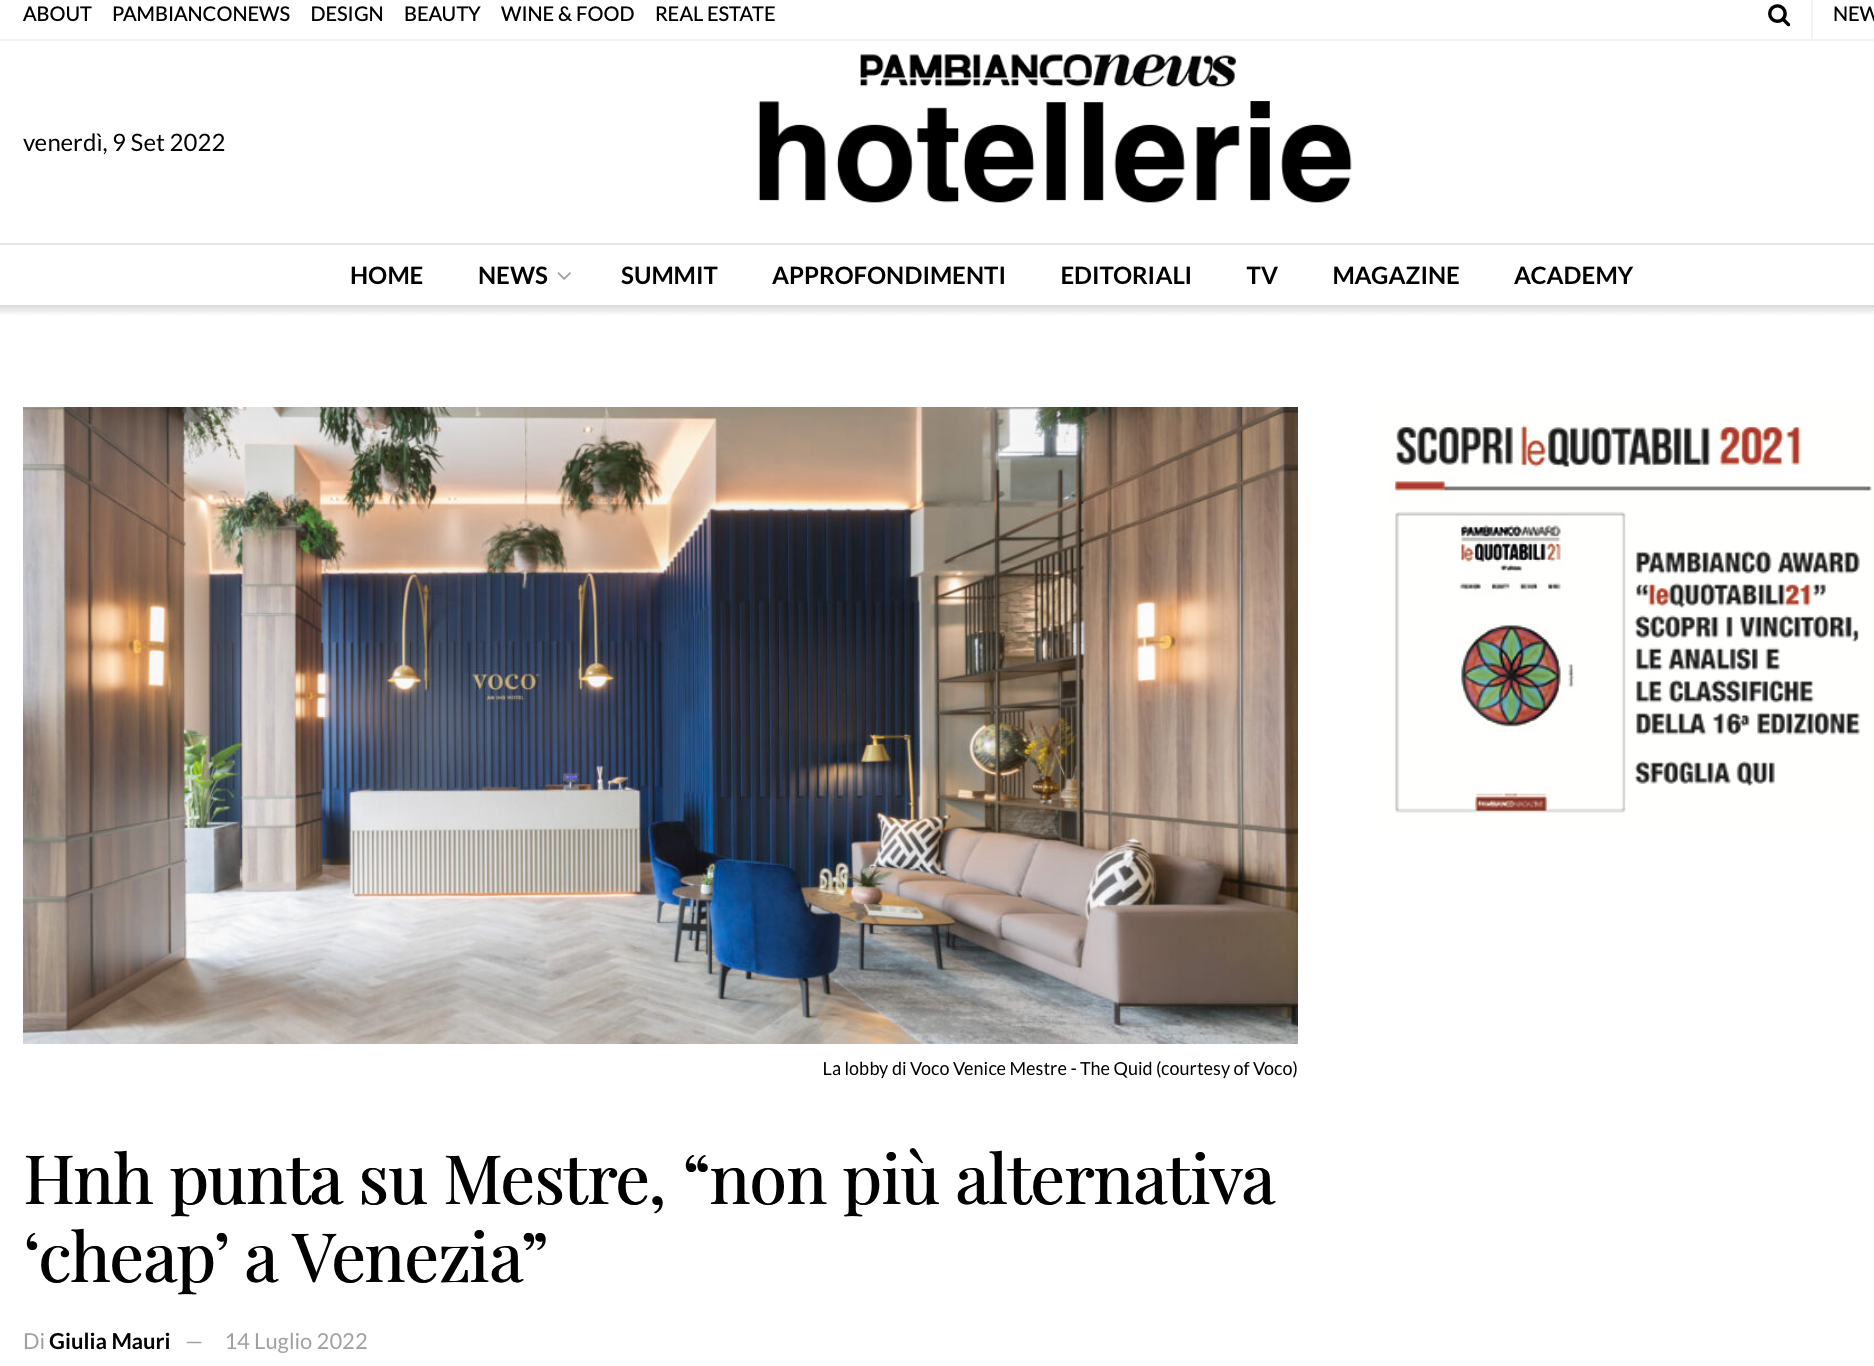 PAMBIANCO HOTELLERIE